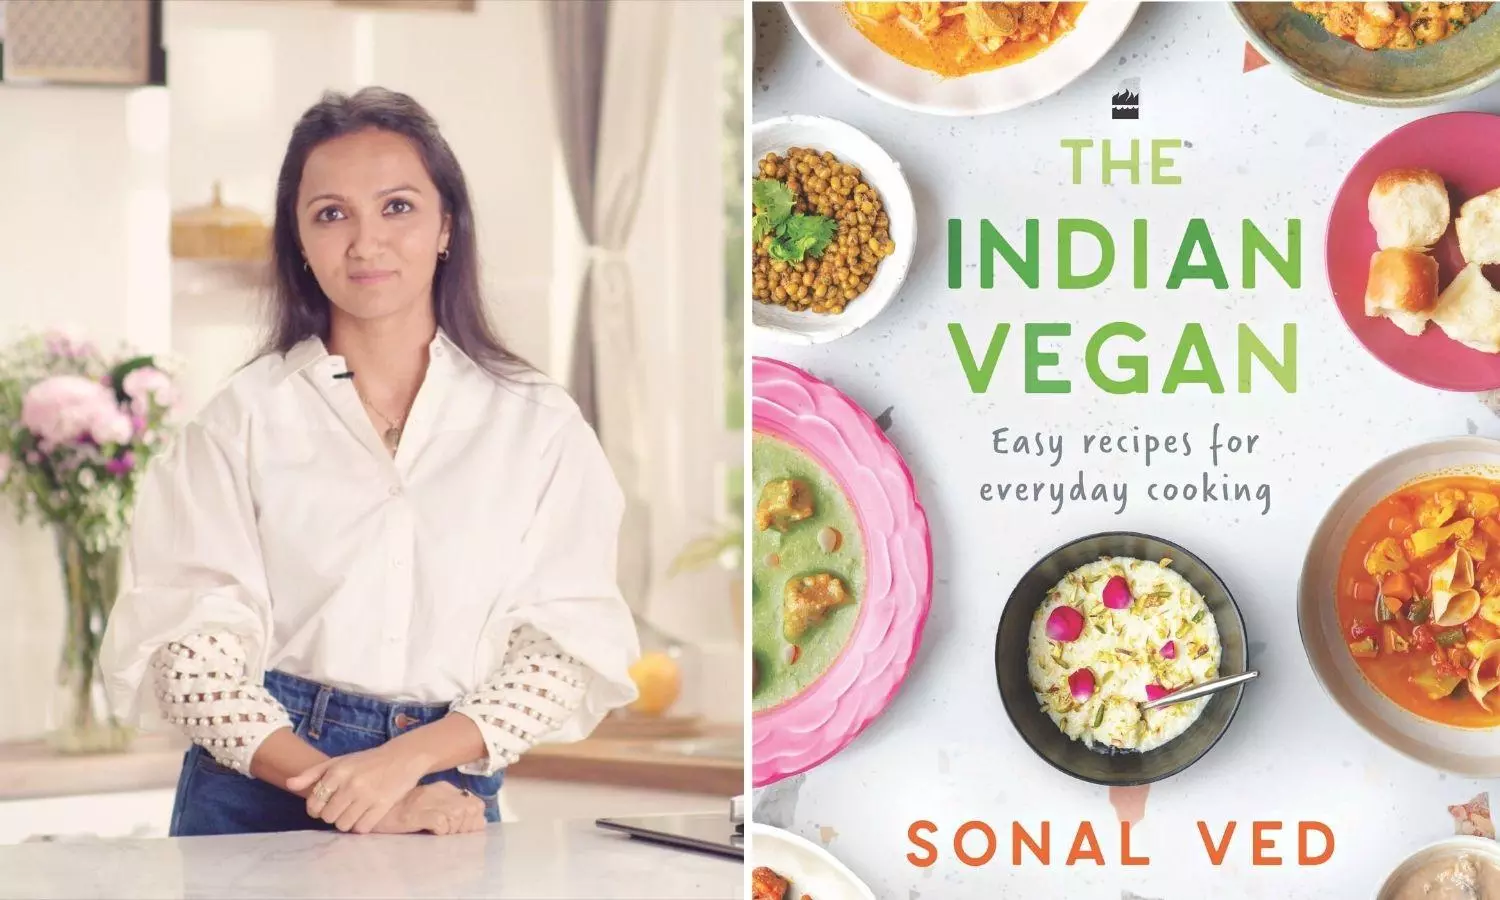 The vegan wave with Sonal Ved has begun